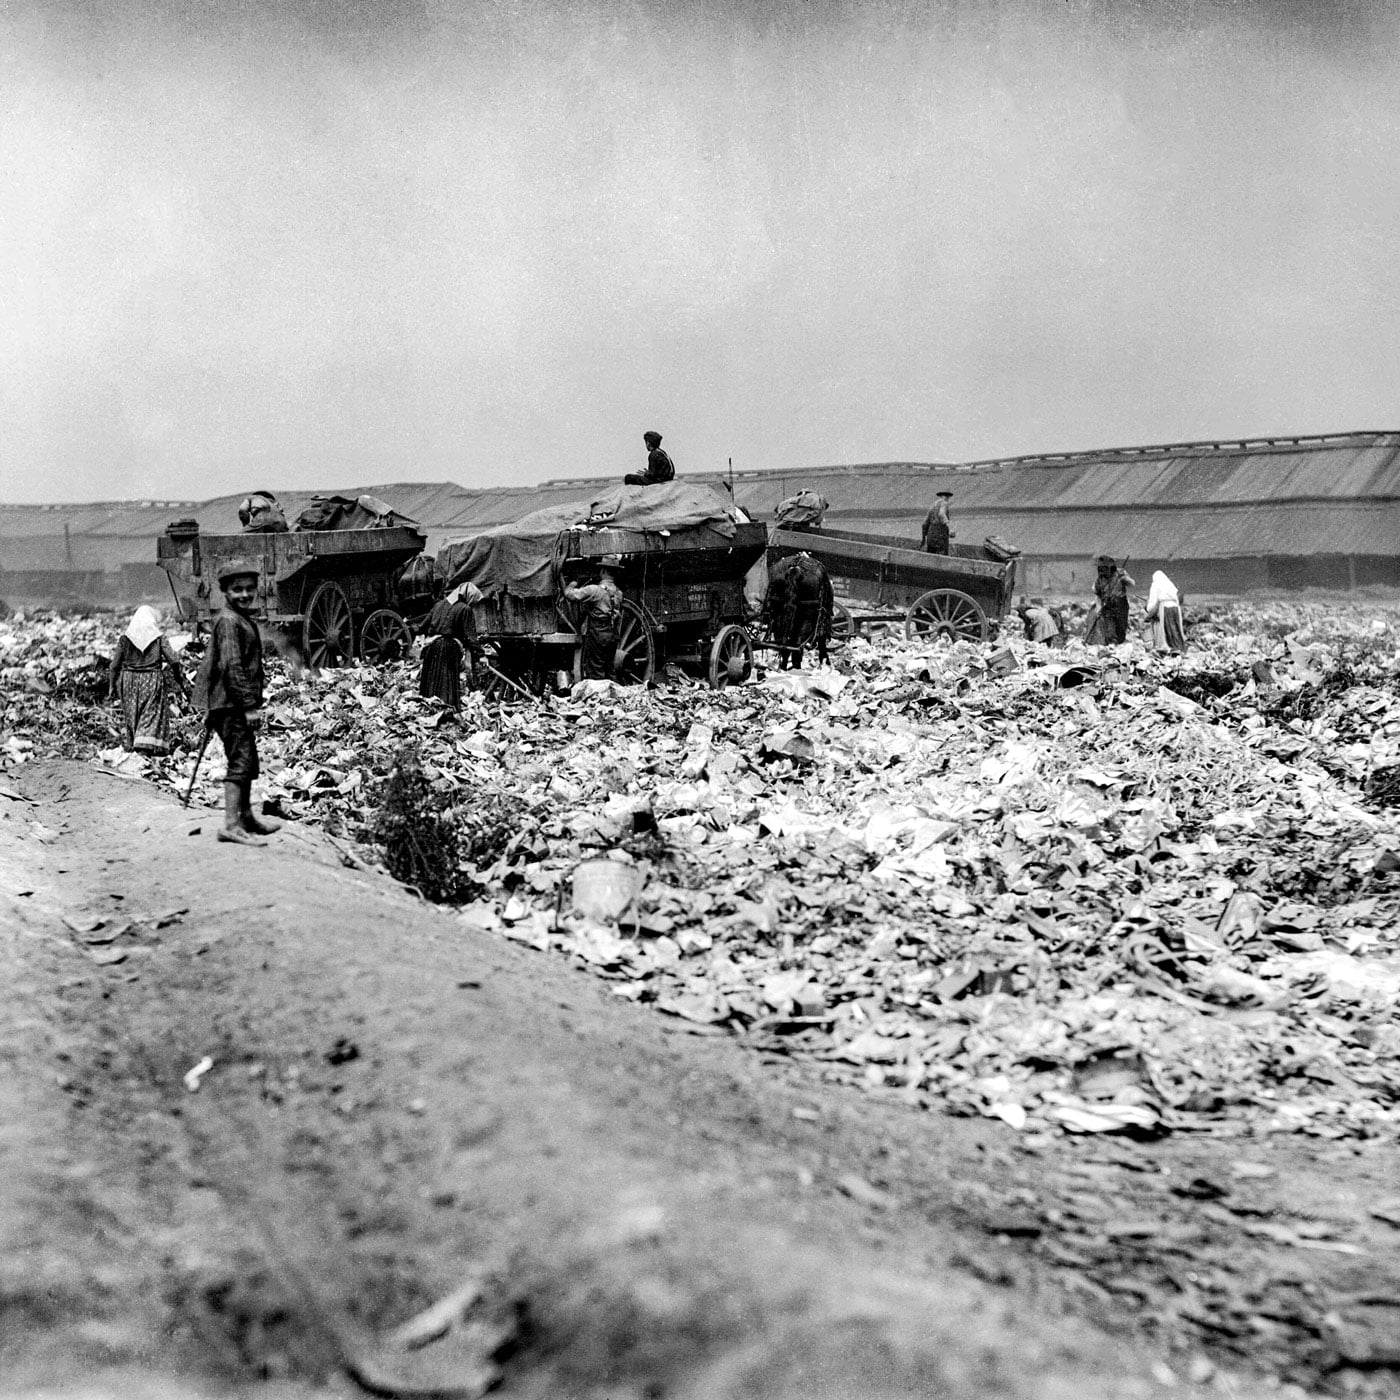 A garbage dump at 47th Street, pictured in 1906